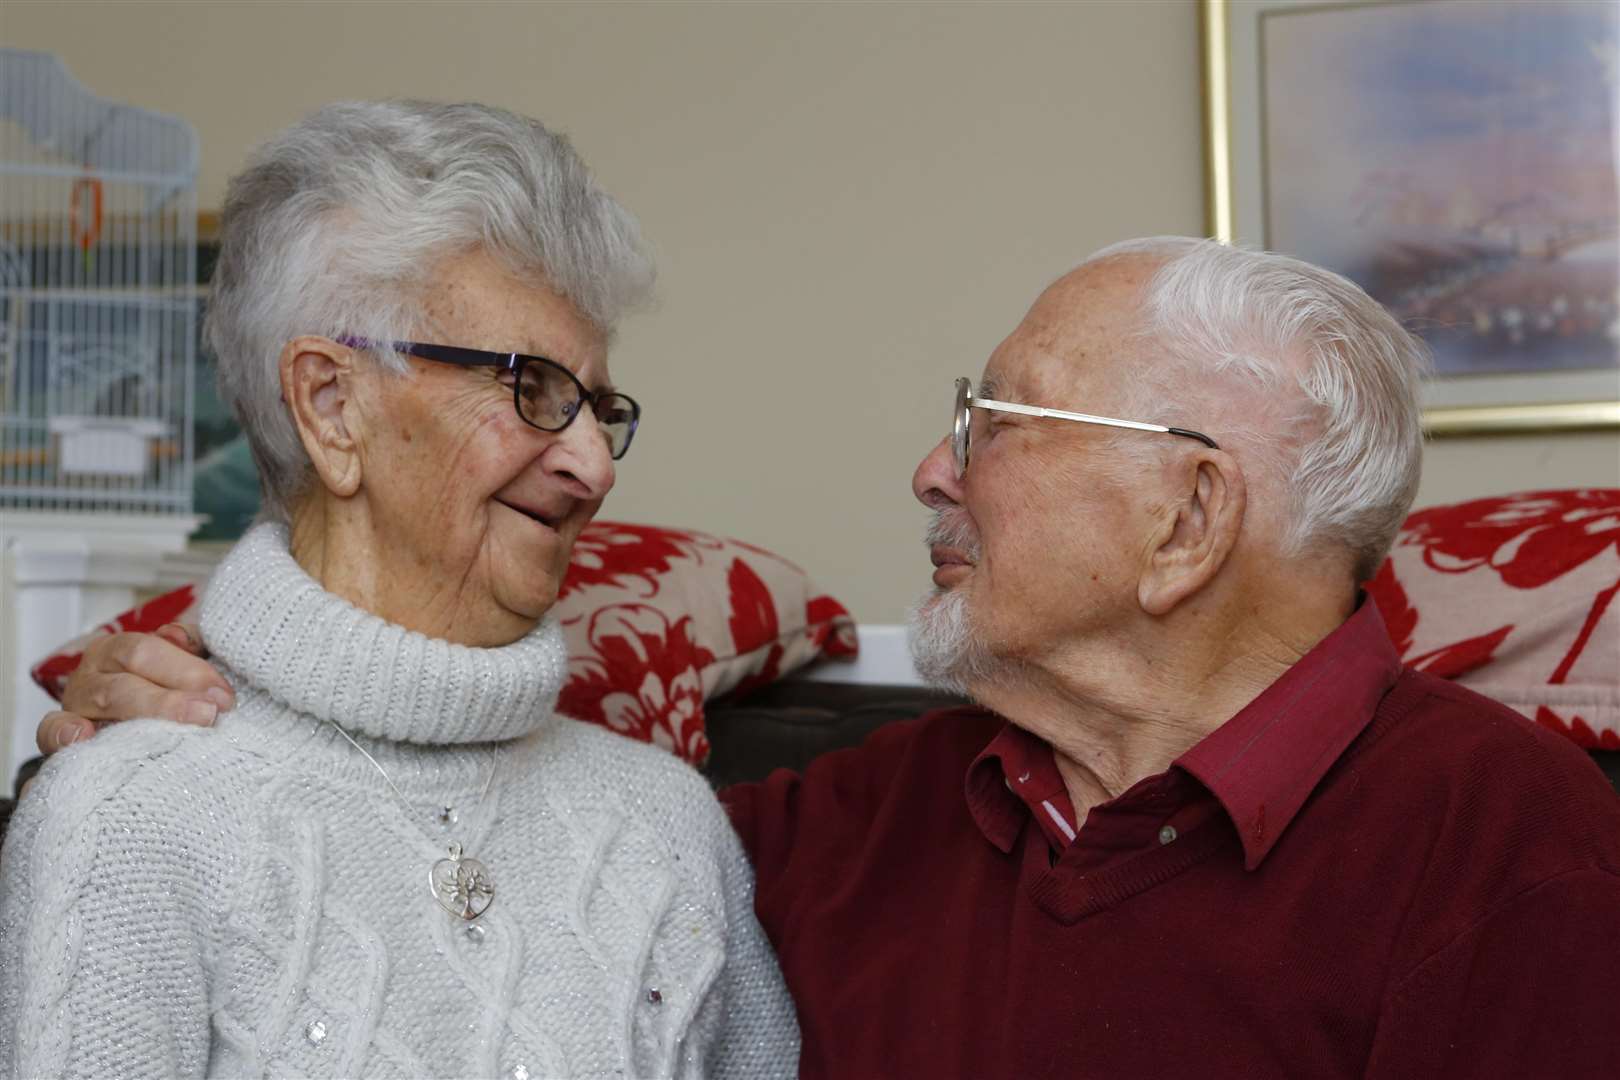 Irene Cowling, 89, and Frank Ramskill, 92, who are getting married